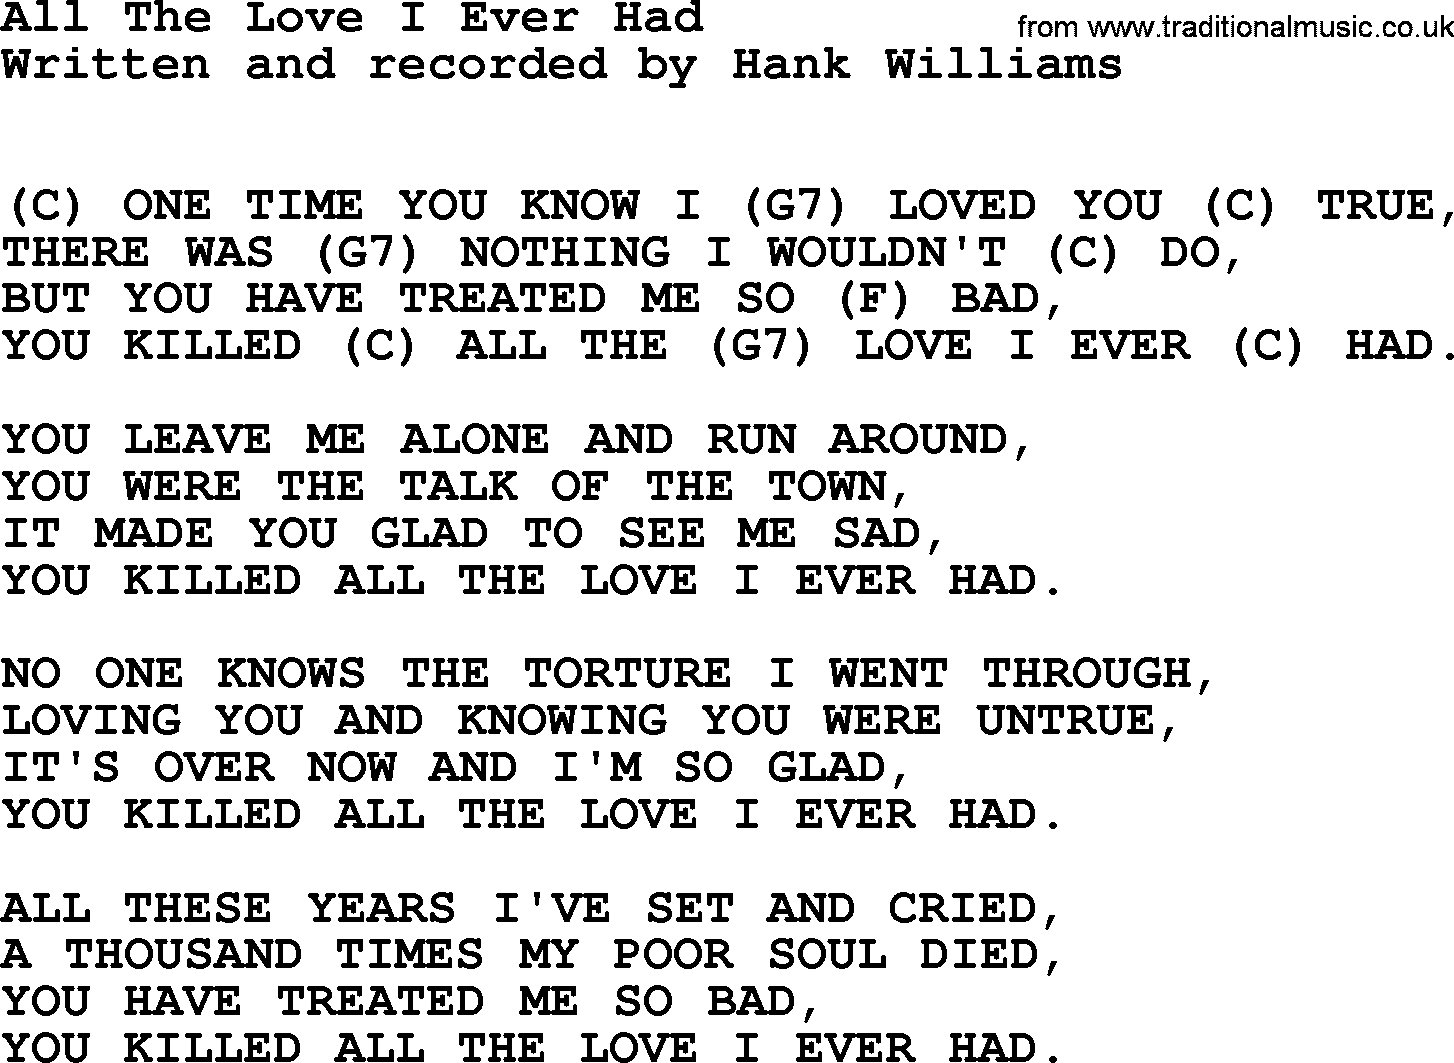 Hank Williams song All The Love I Ever Had, lyrics and chords